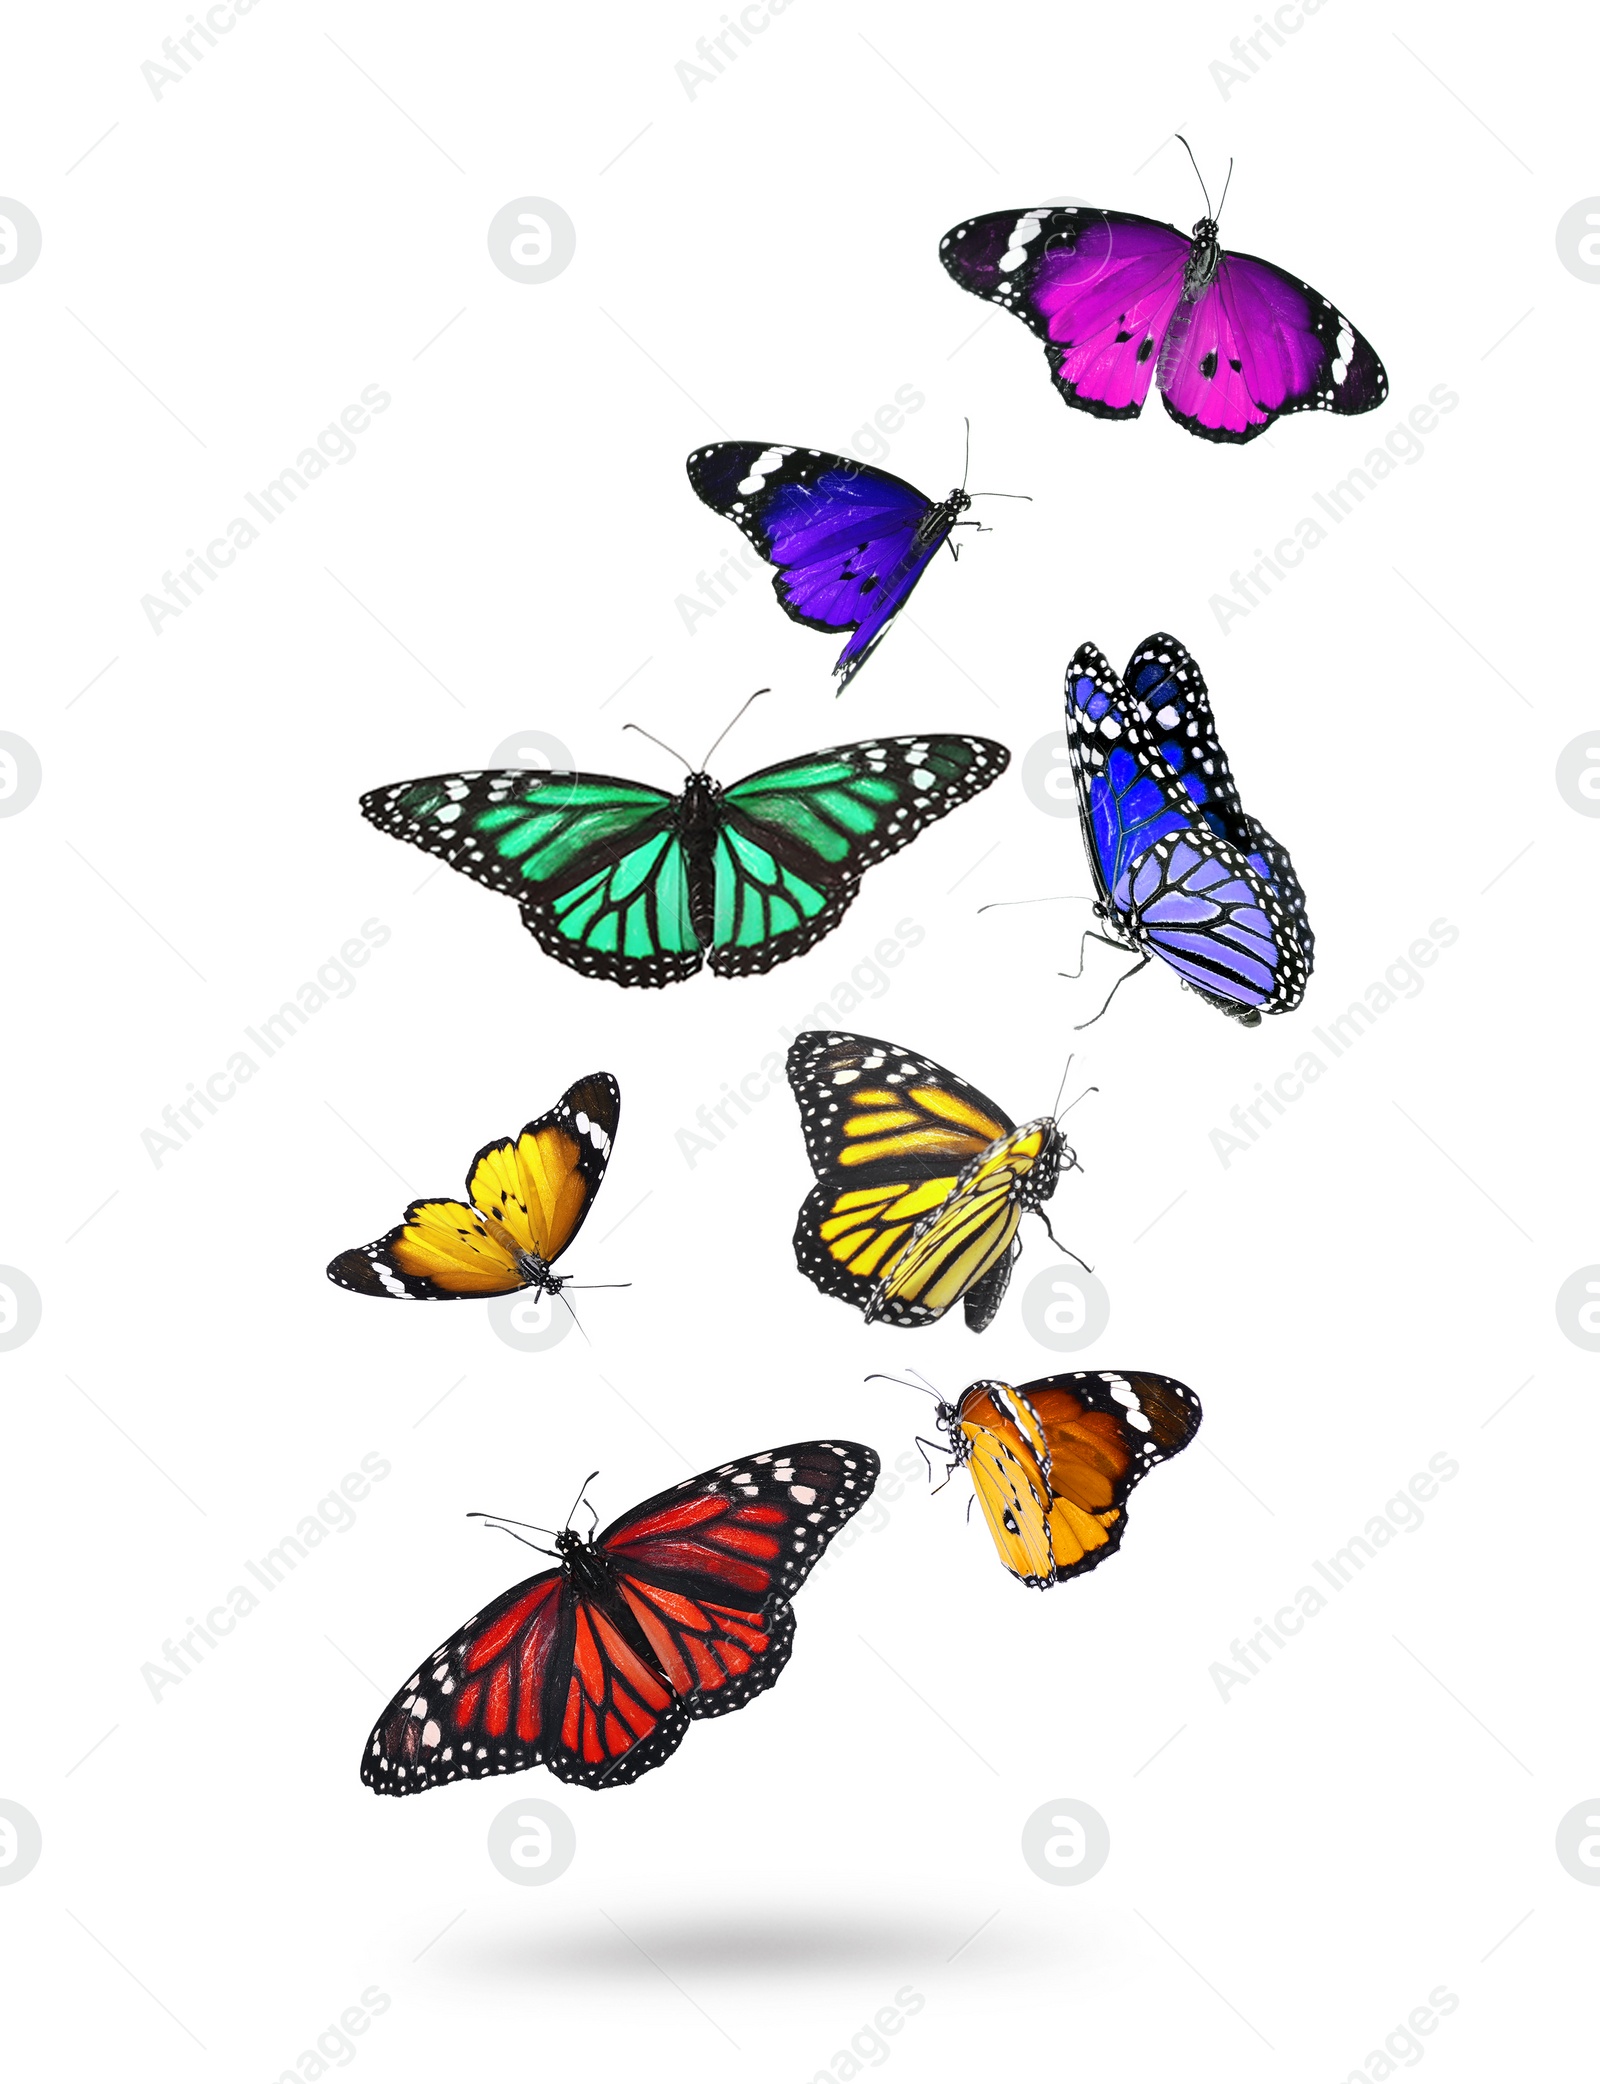 Image of Many beautiful flying colorful butterflies on white background